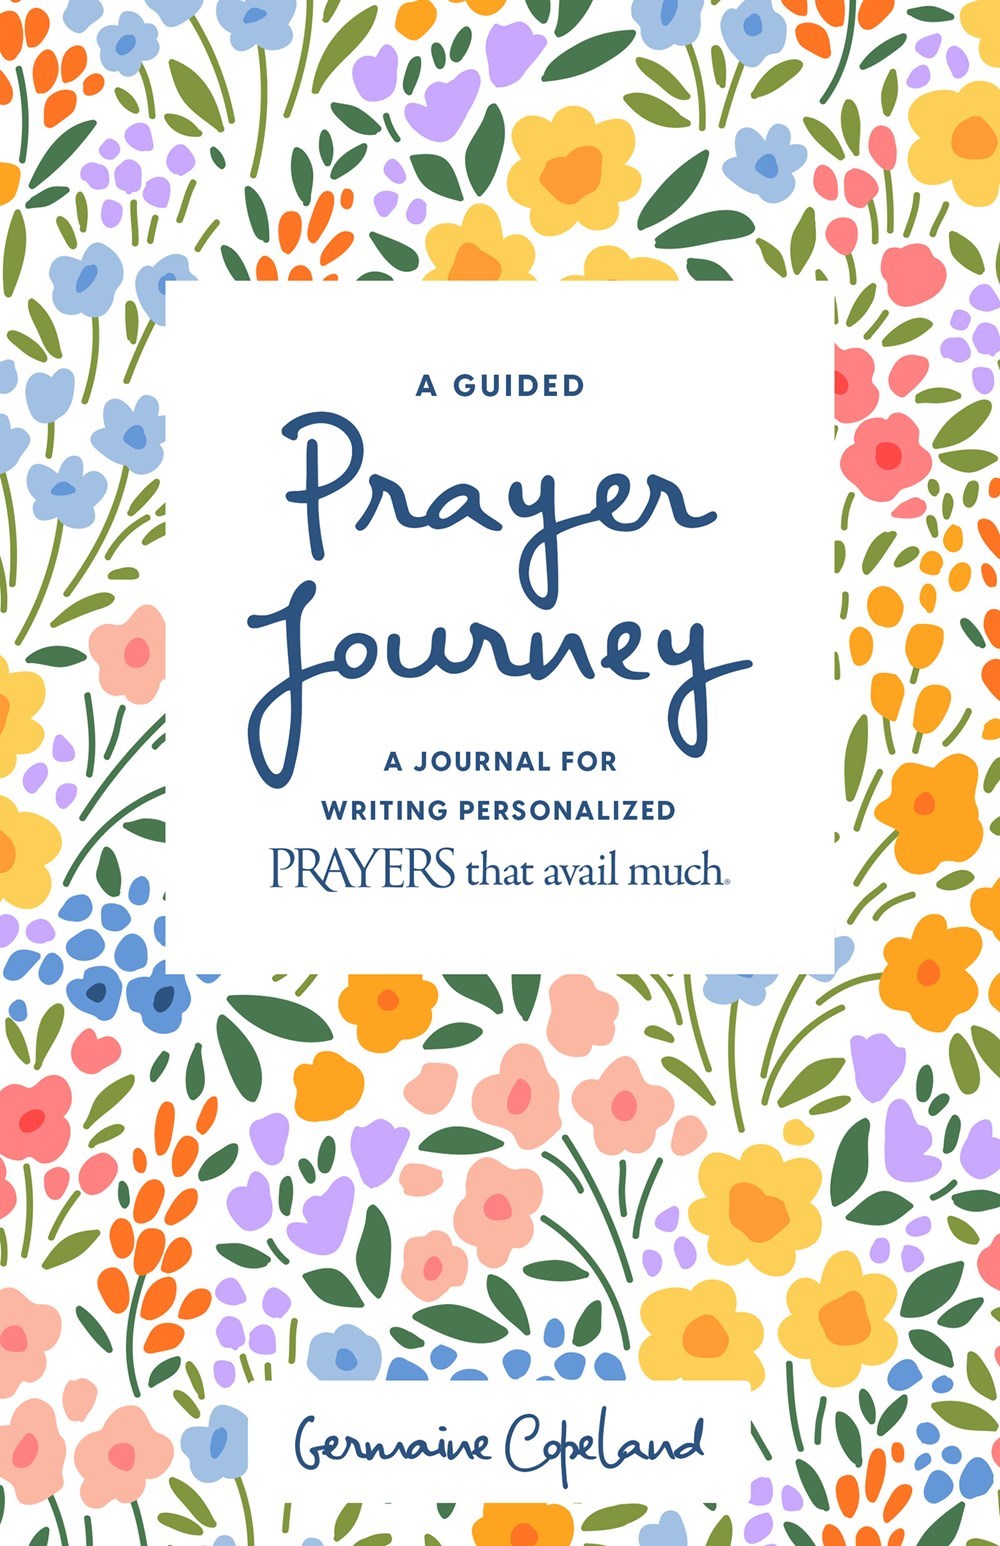 Seed of Abraham Christian Bookstore - Germaine Copeland - A Guided Prayer Journey - A Journal for Writing Personalized Prayers That Avail Much